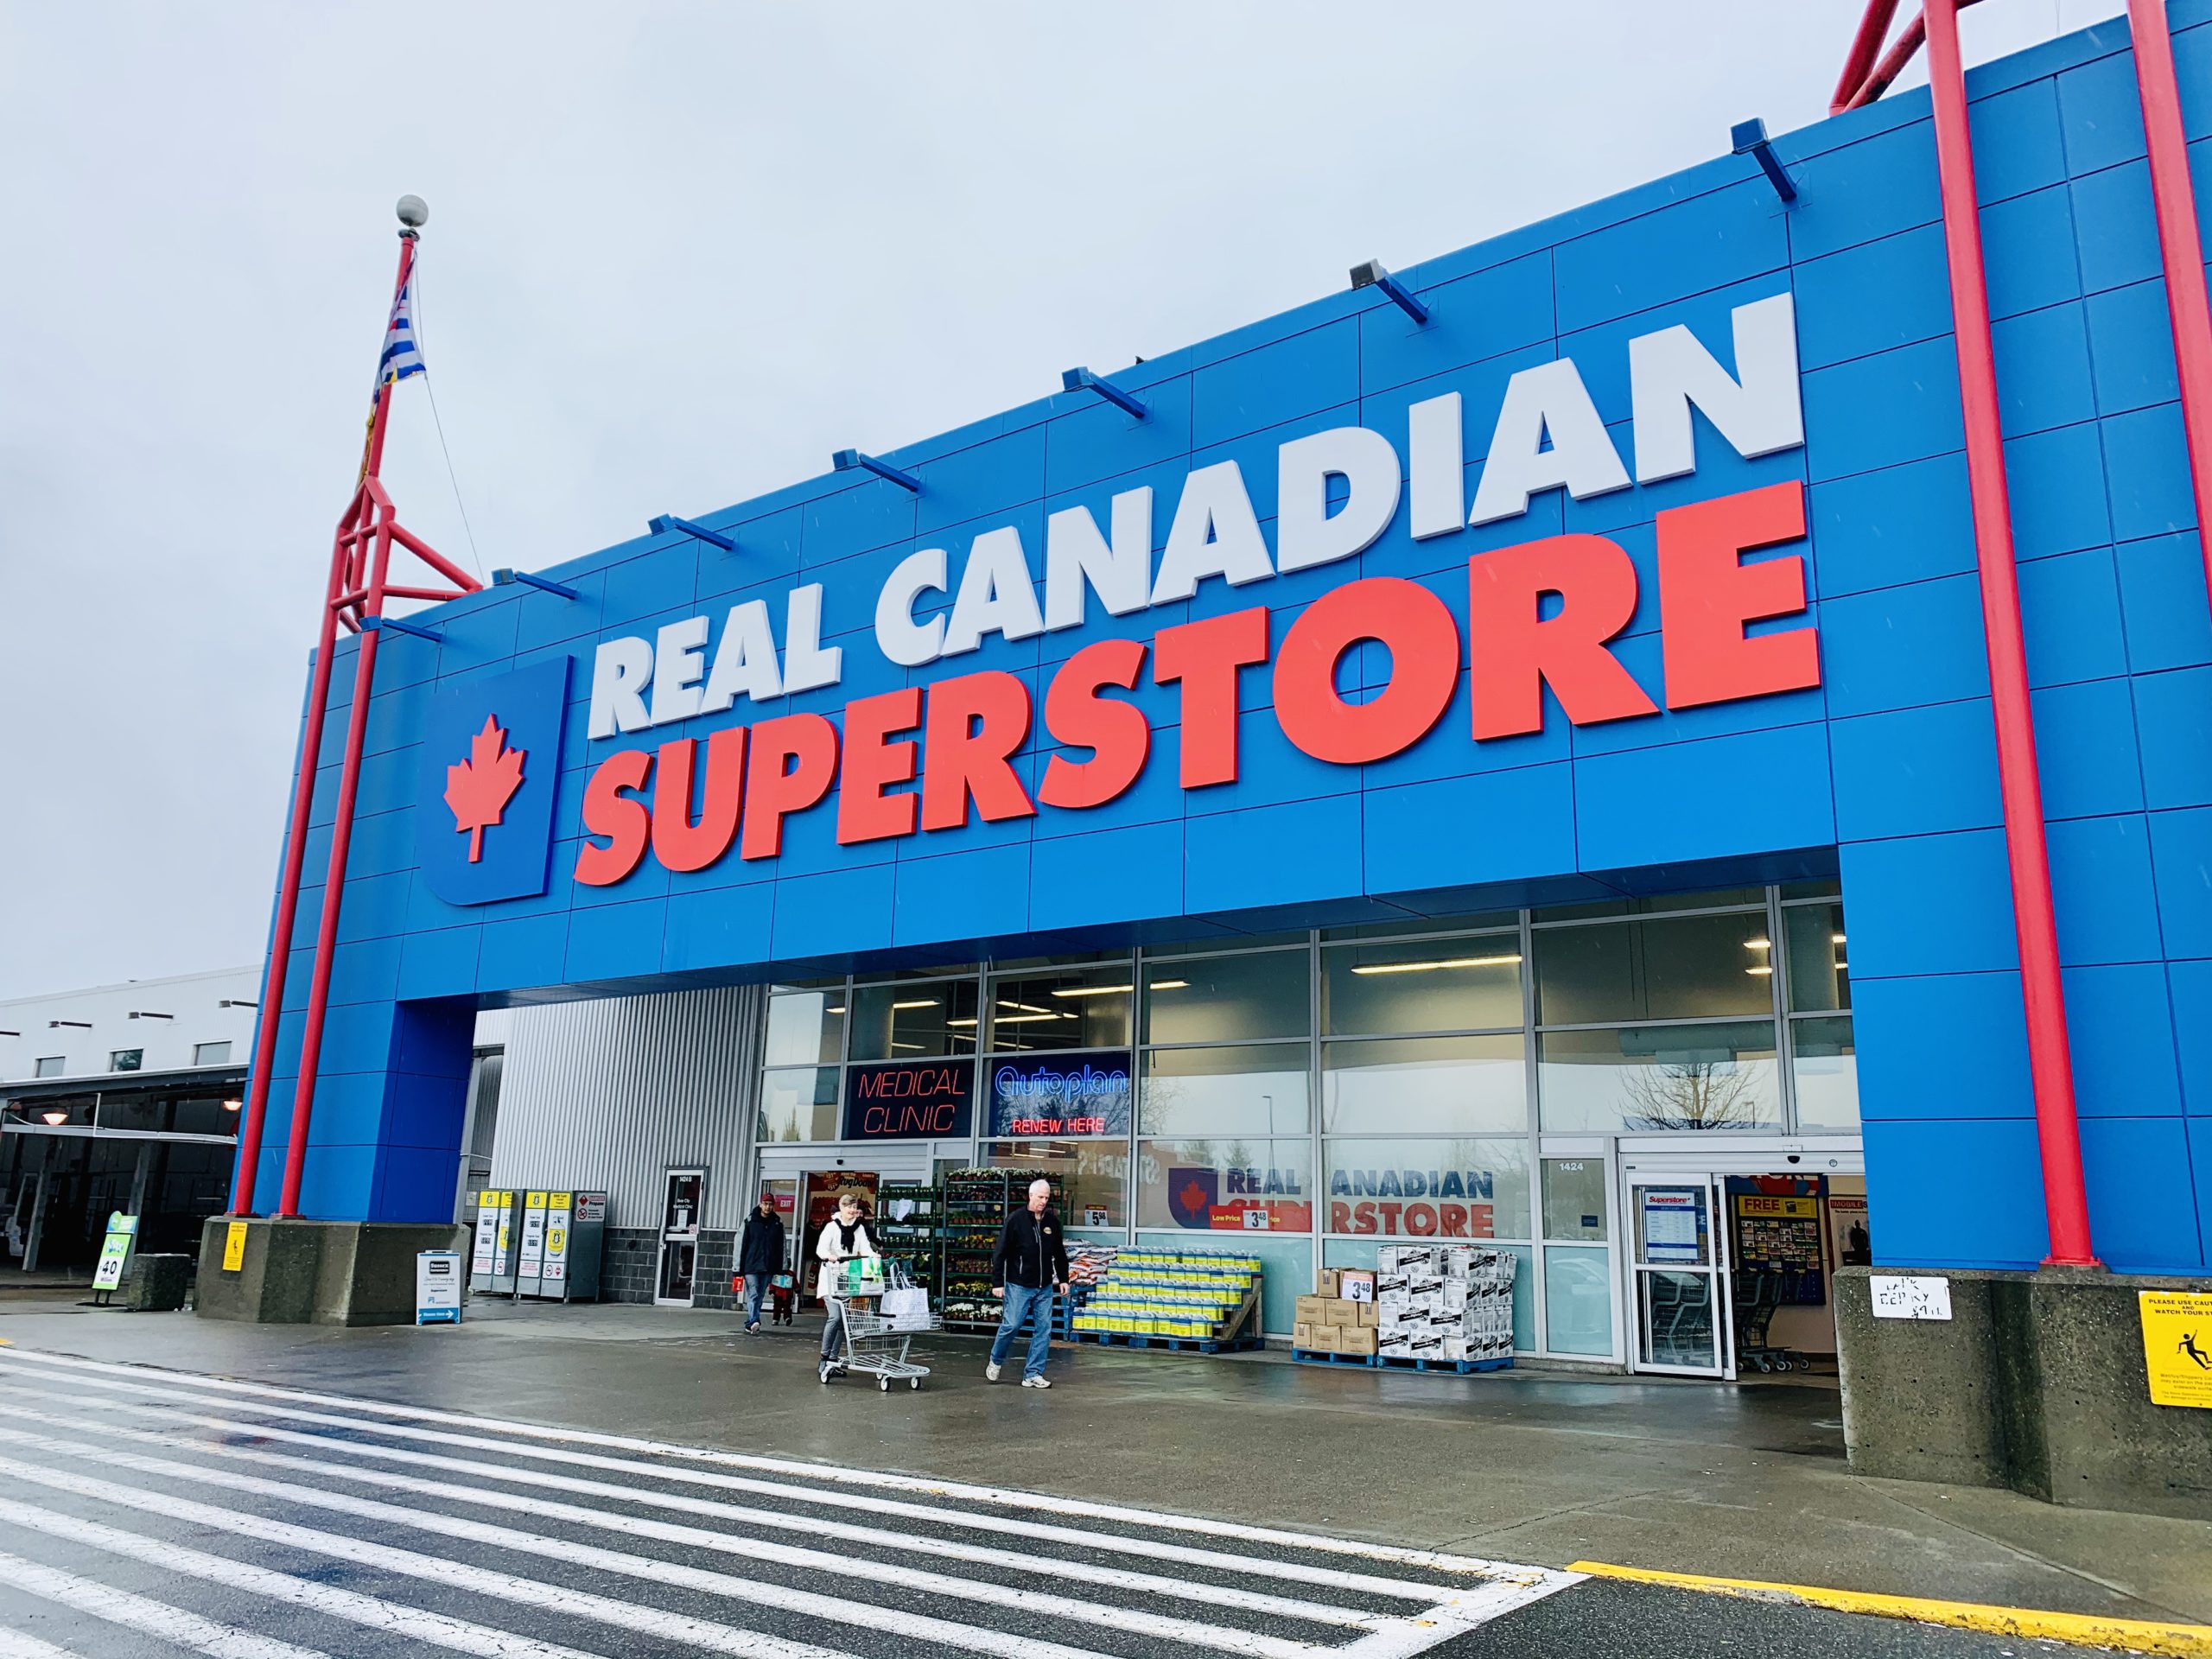 Now available at Real Canadian Superstore